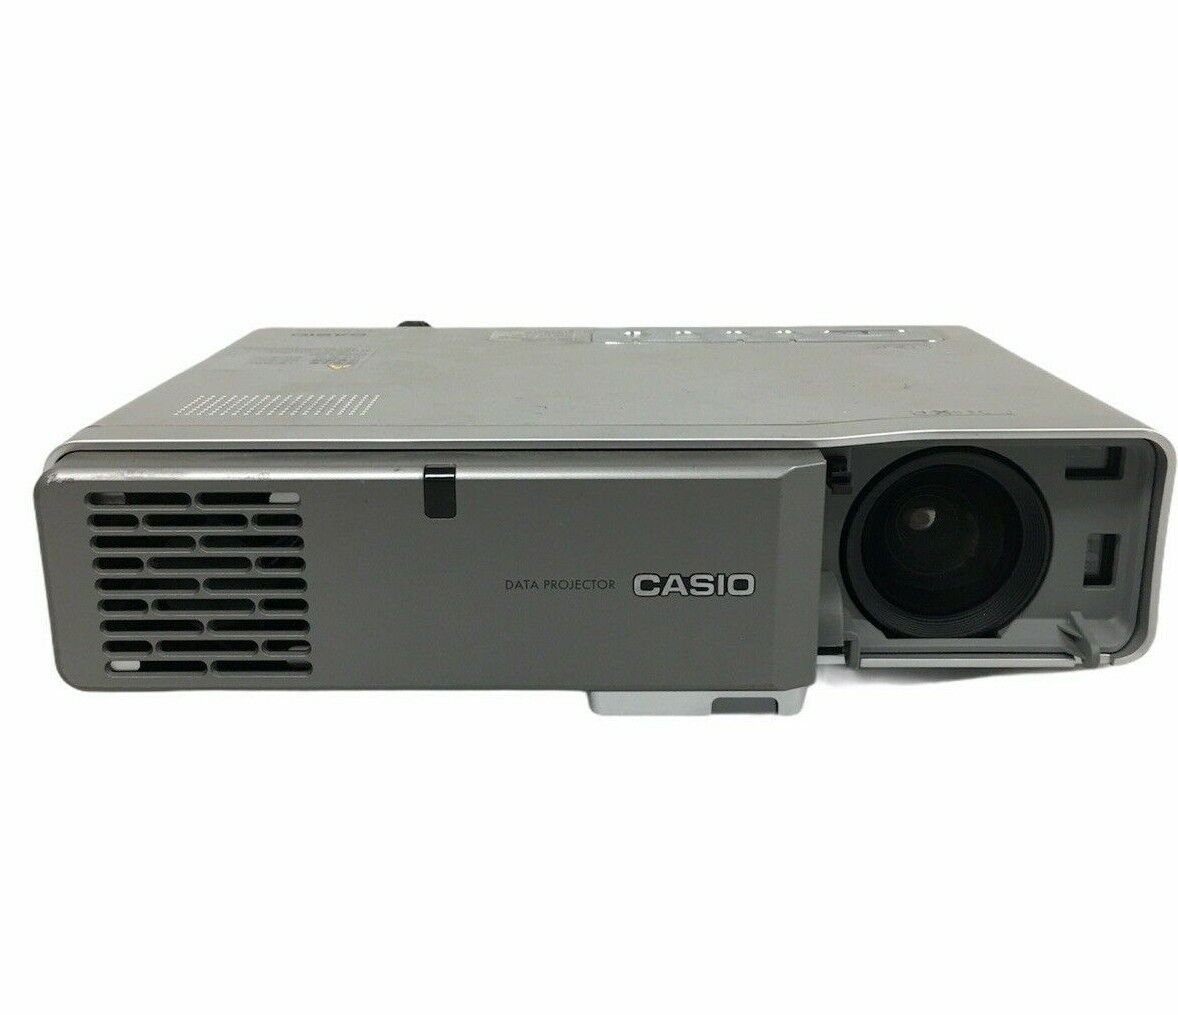 Casio Data Projector XJ-560, No Remote, For Parts/Not Working | #10122